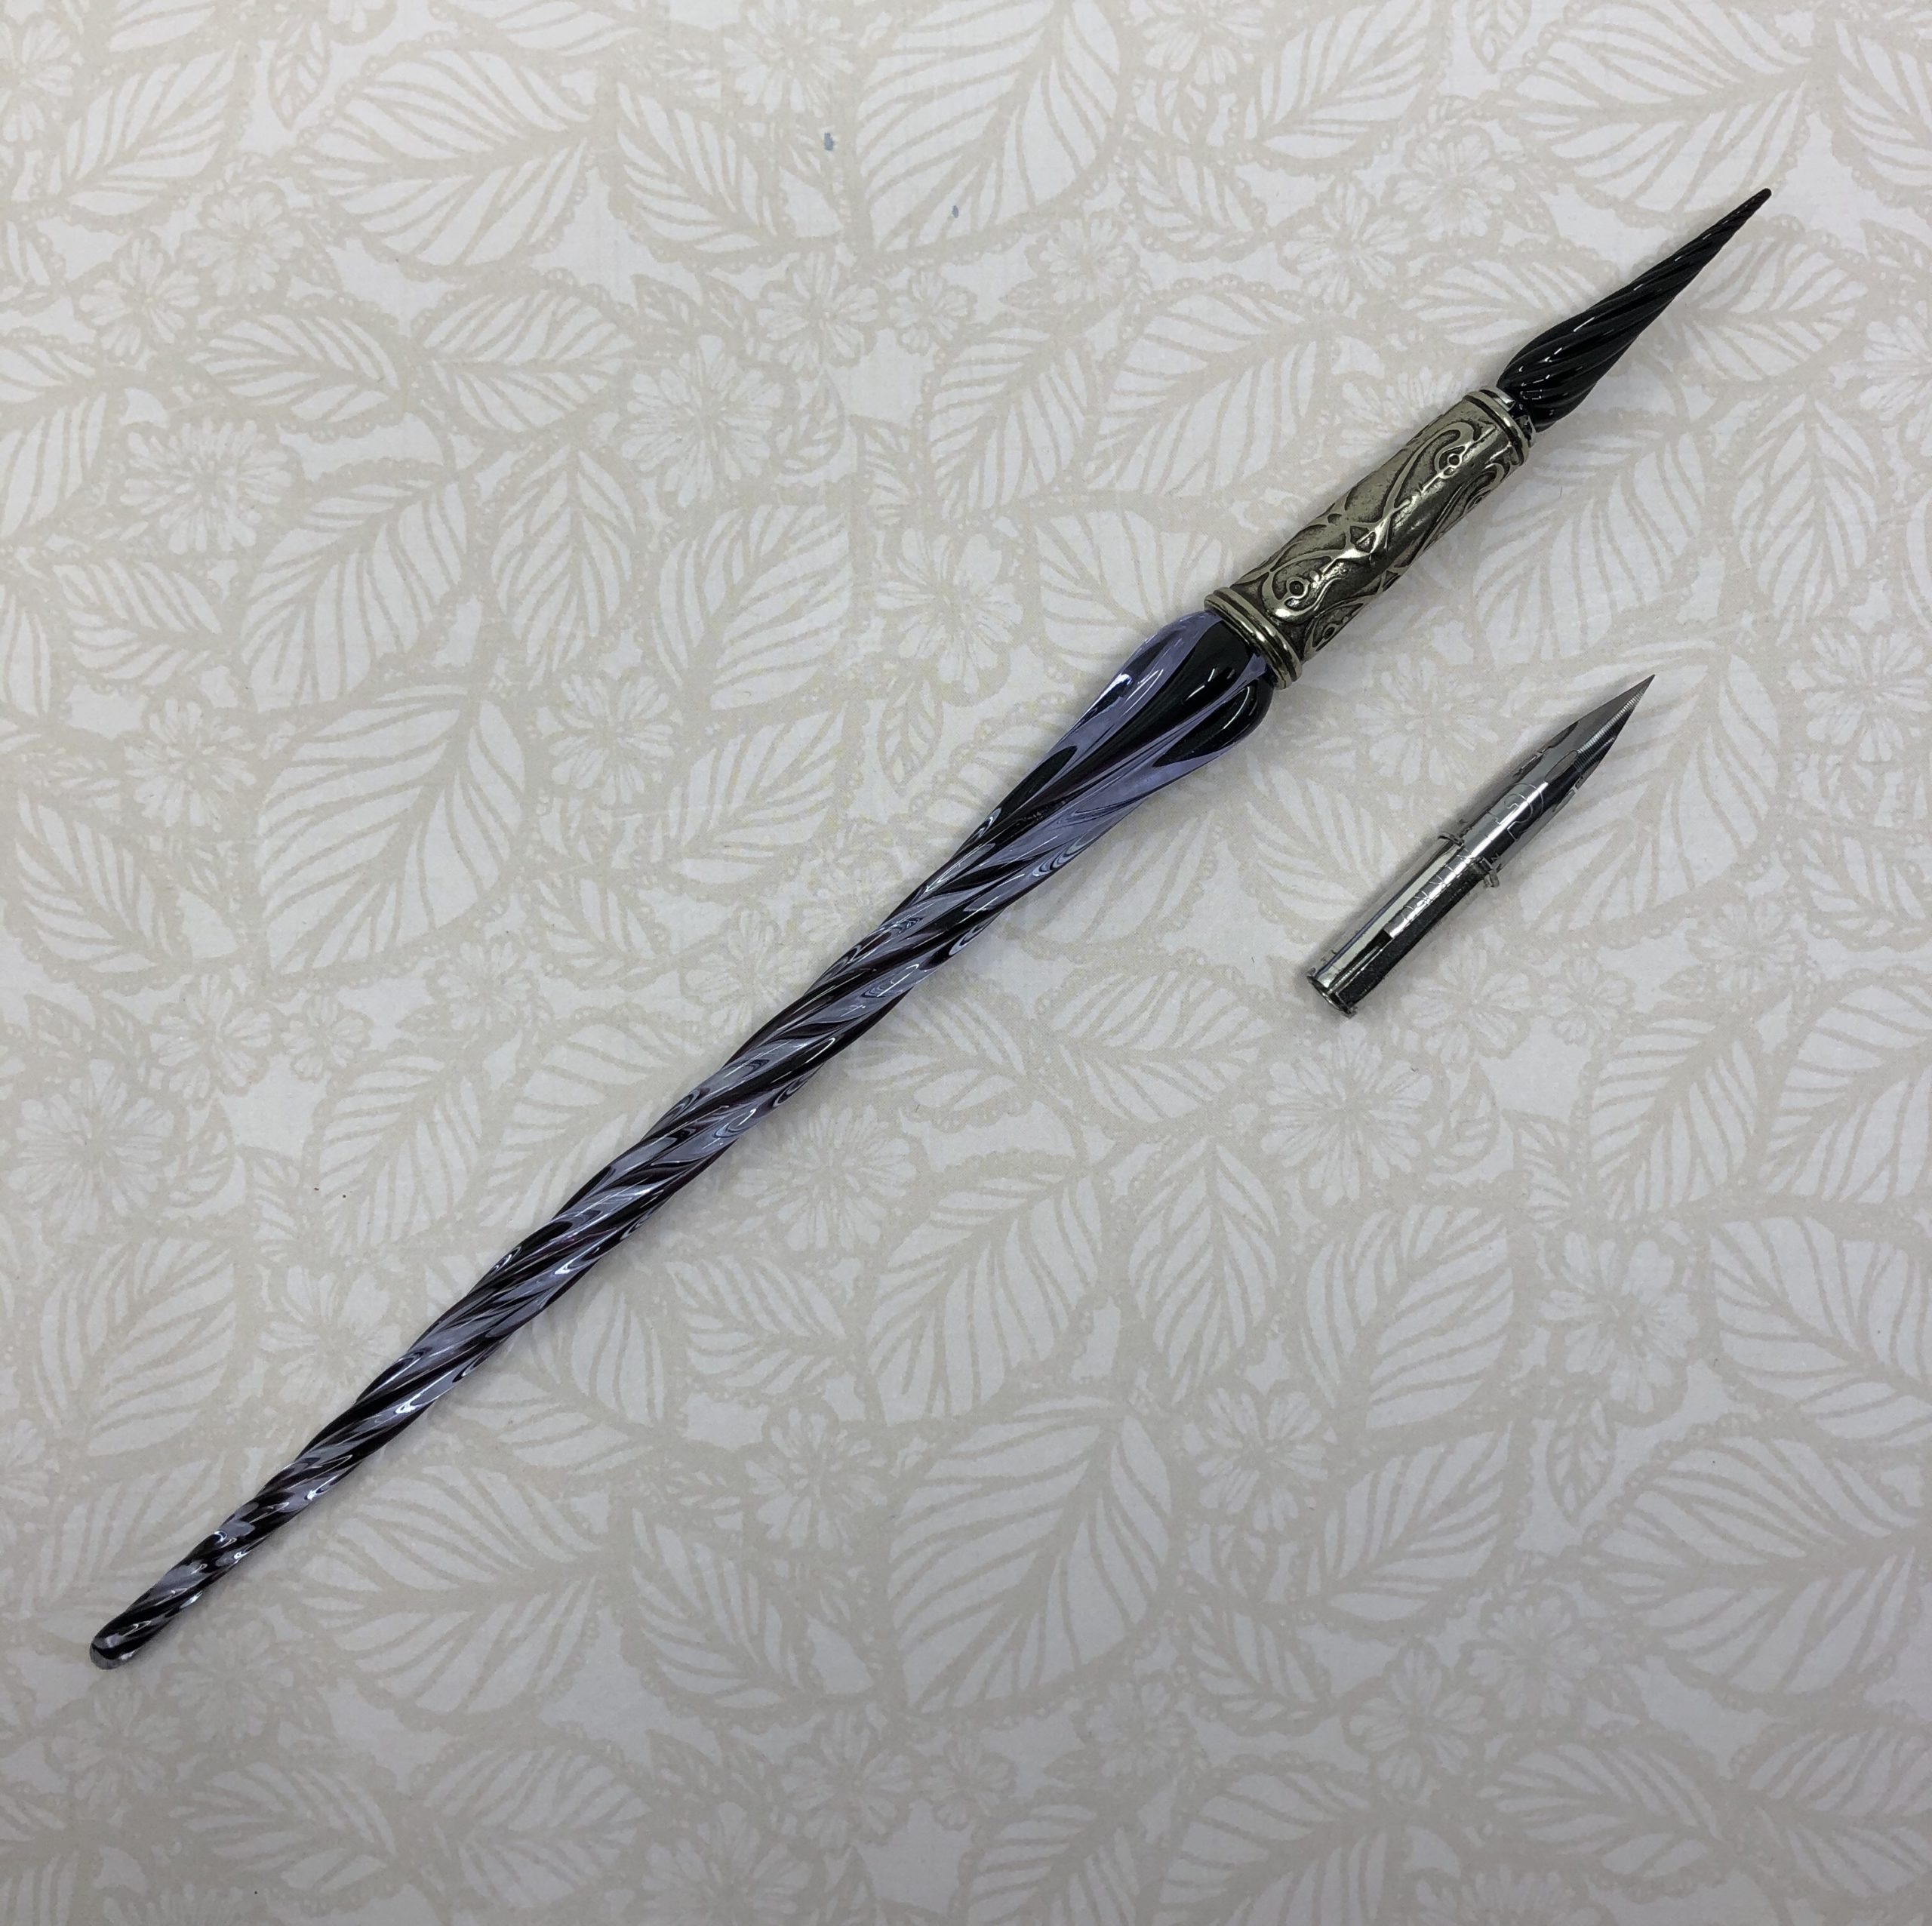 Bortoletti Entwined Glass Murano Glass Dipping Pen With Glass or Metal Nib  - The Well-Appointed Desk